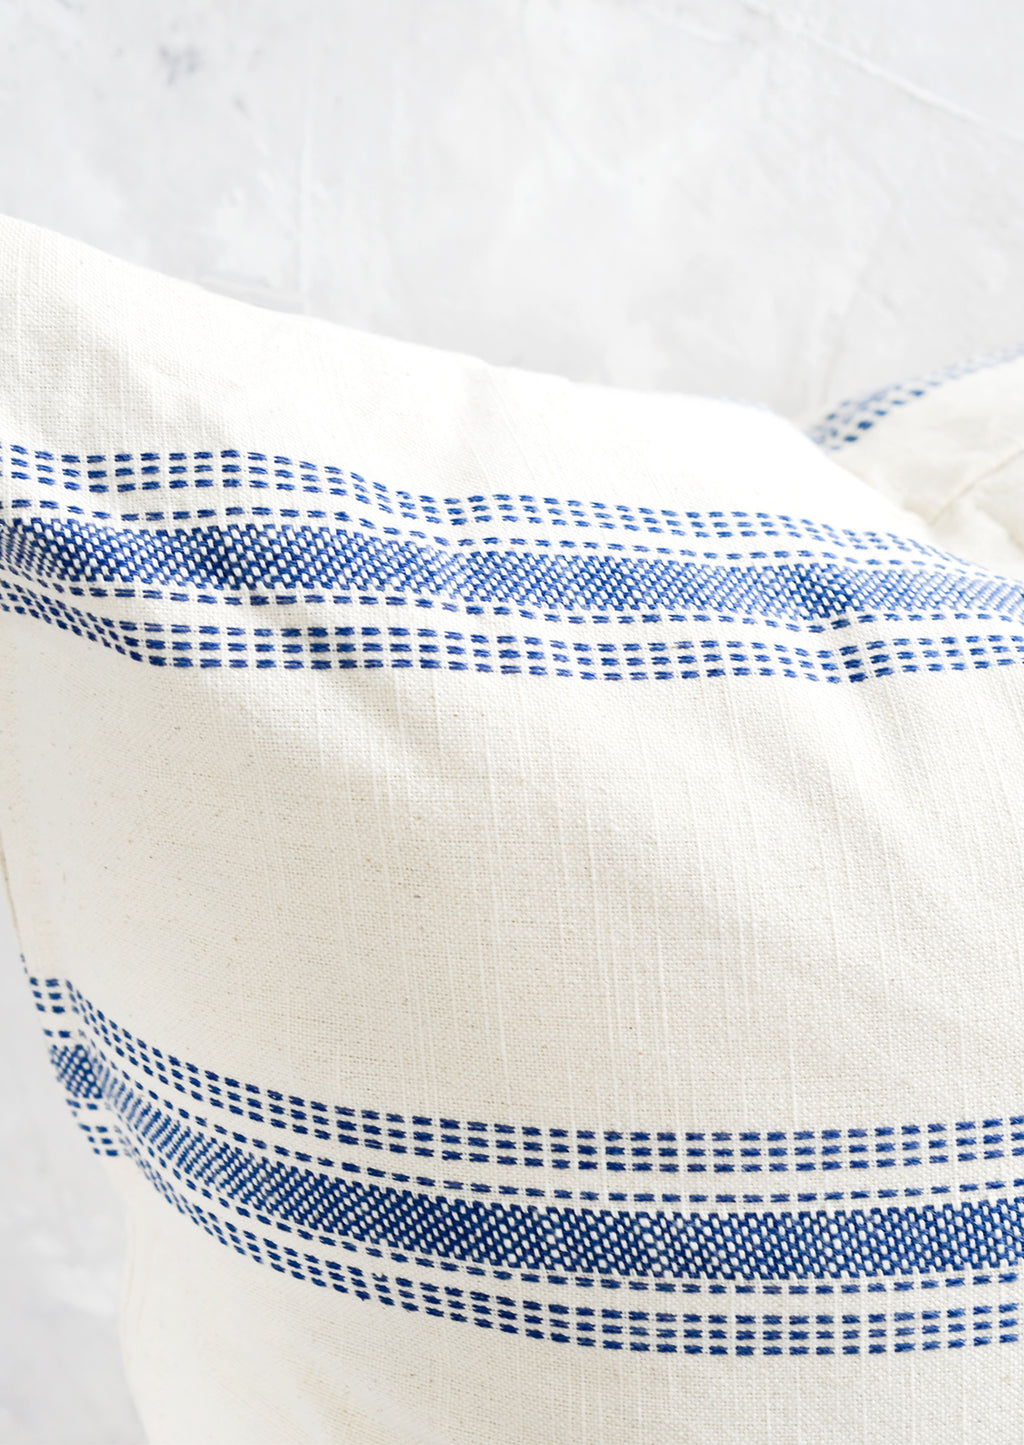 4: Blue embroidered stripe detailing on cream colored cotton.